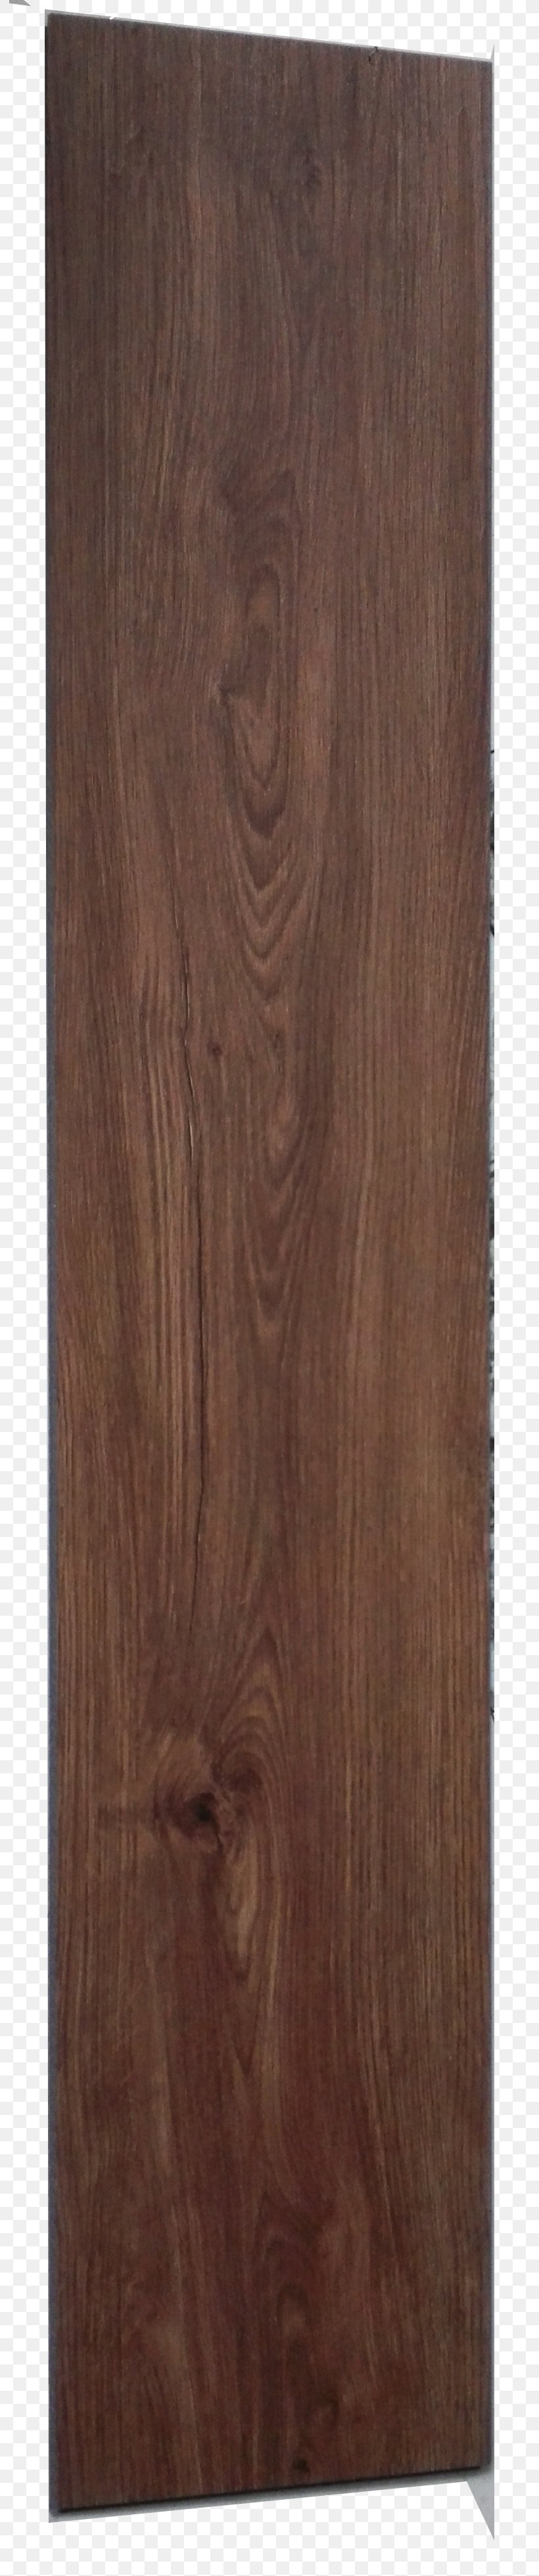 Laminate Flooring Pavement Suelo De PVC Wood, PNG, 792x3922px, Floor, Adhesive, Brown, Coating, Contrapiso Download Free